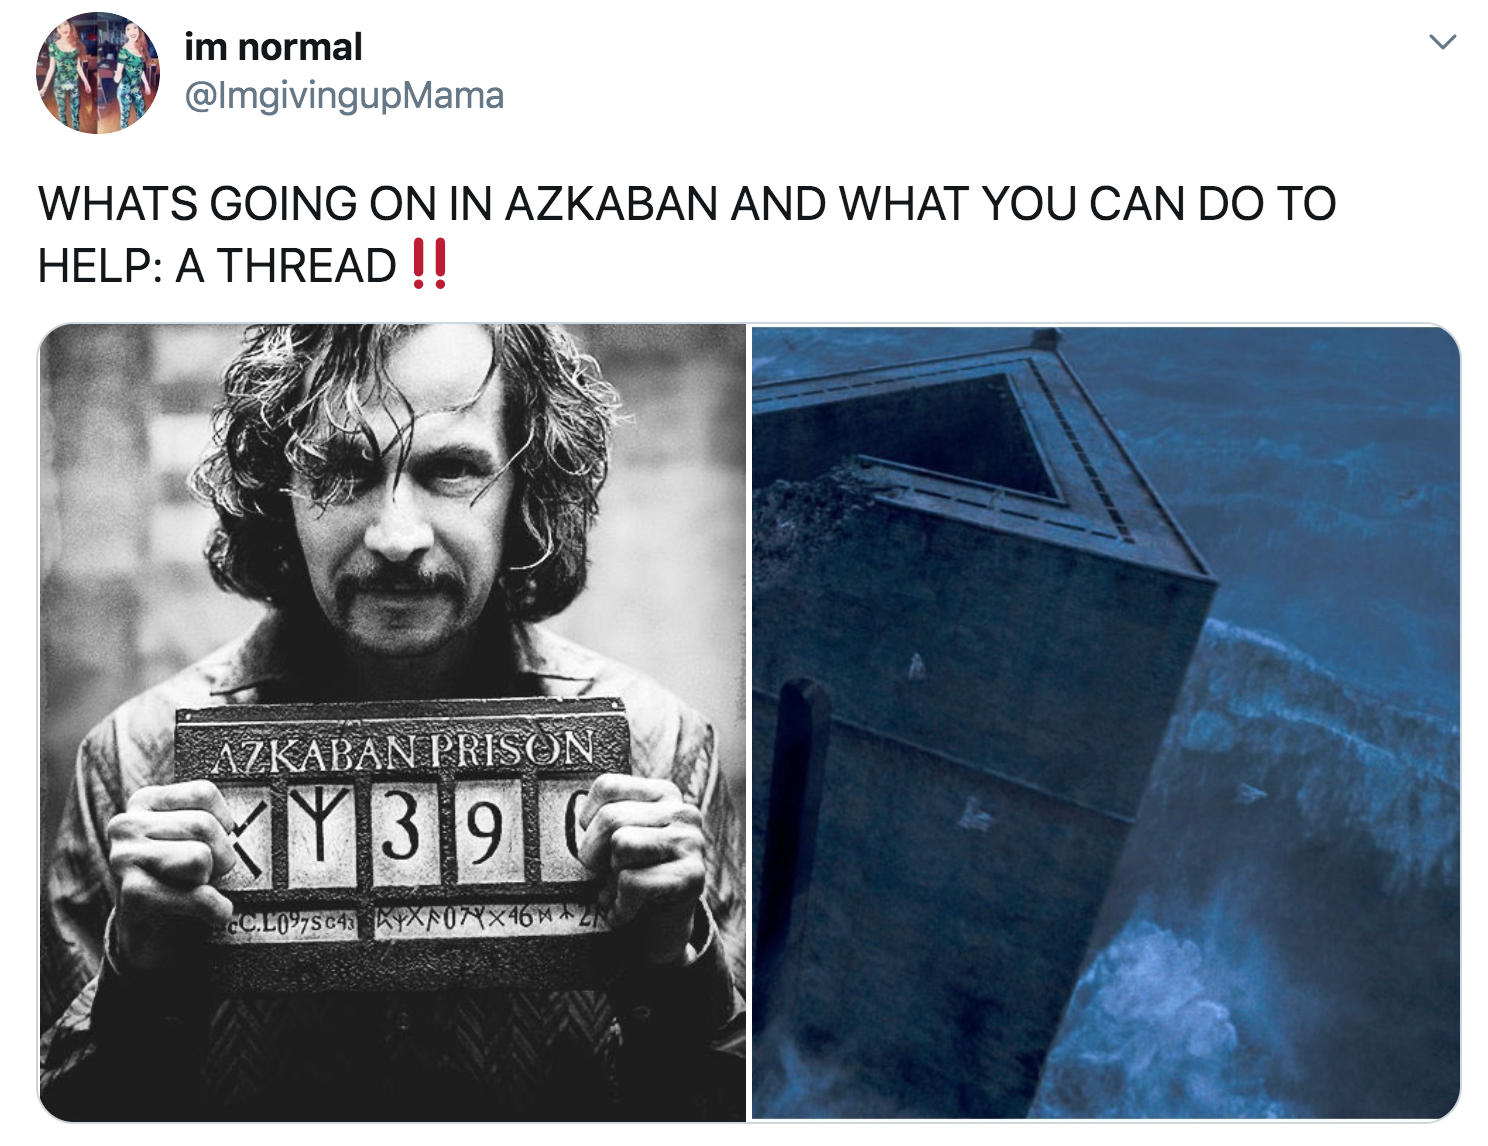 sirius black azkaban - im normal Whats Going On In Azkaban And What You Can Do To Help A Thread !! Azkaban Prison Xy 396 Colos